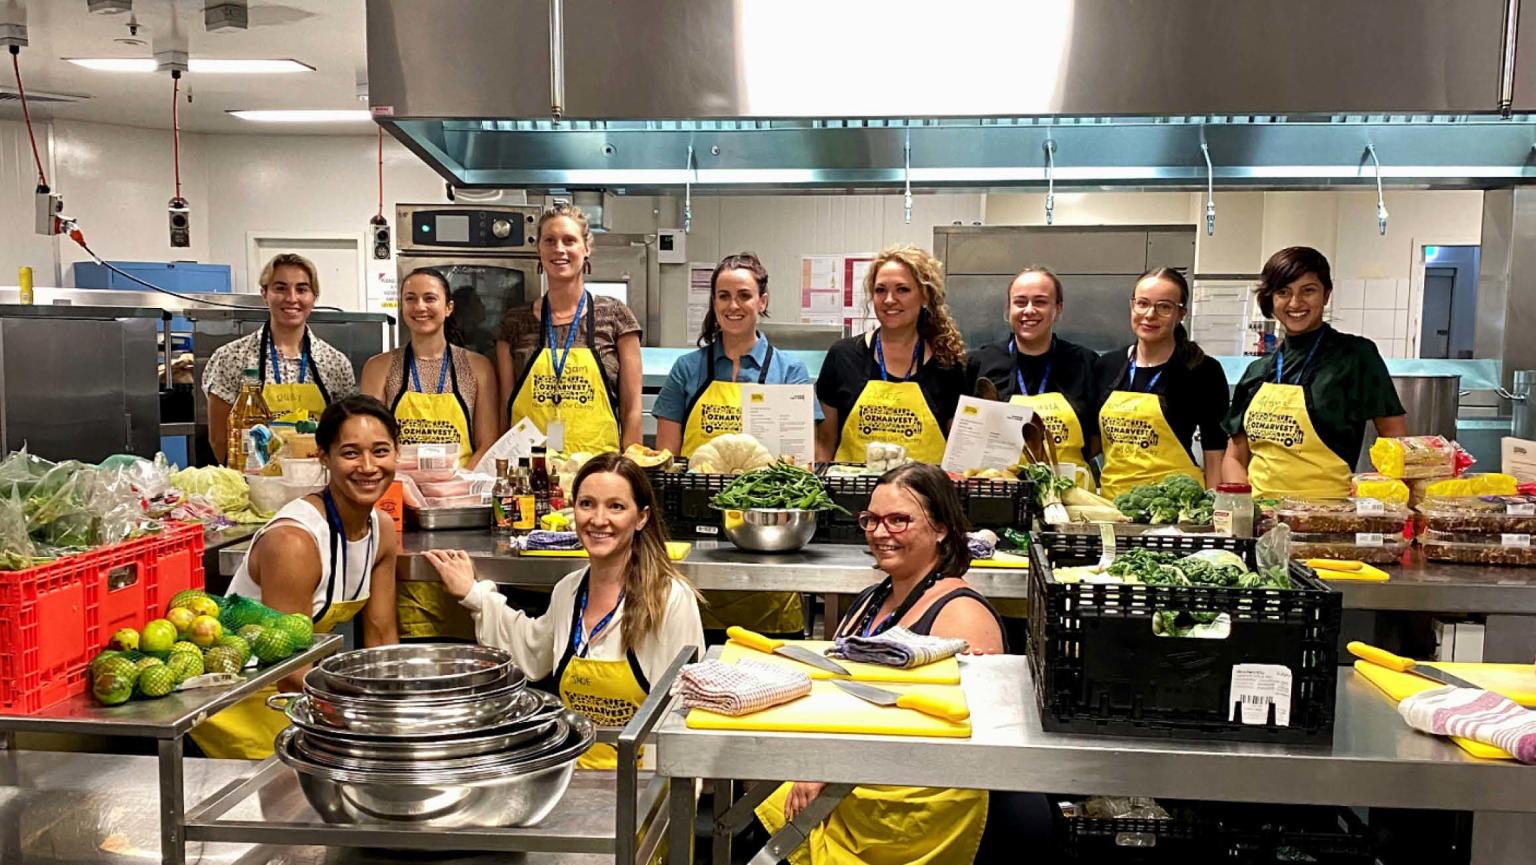 An image showing a group of 11 people standing in a commercial kitchen surrounded by ingredients, all wearing yellow OzHarvest aprons. 